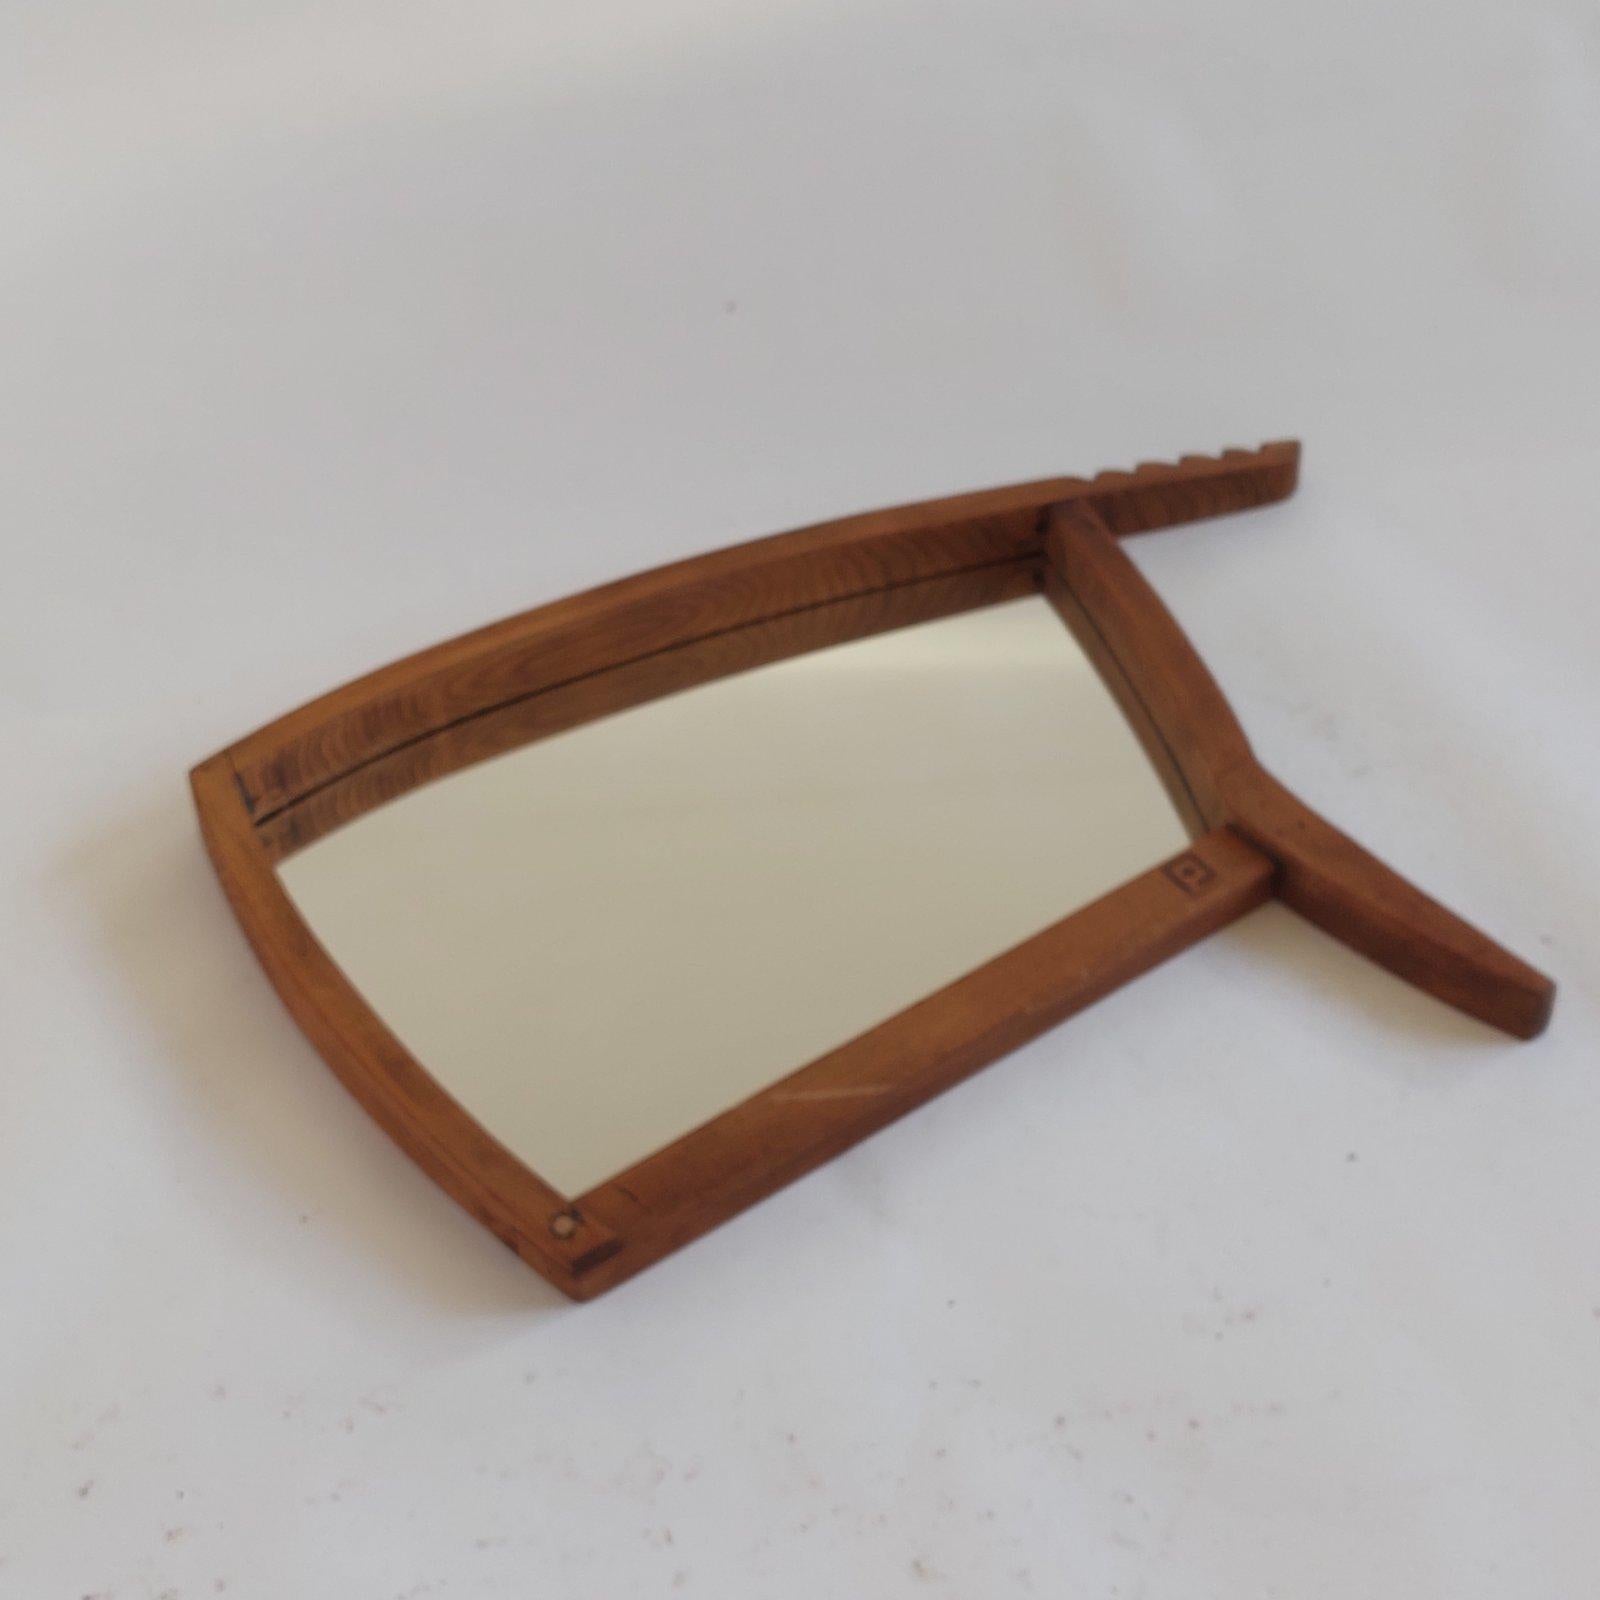 Here we present a walnut mirror frame hand made of antique chairs parts by PUNKT Workshop who are inspired to upcycle using great wooden and leather parts from antique and vintage furniture. They transform and breathe new life into vintage furniture